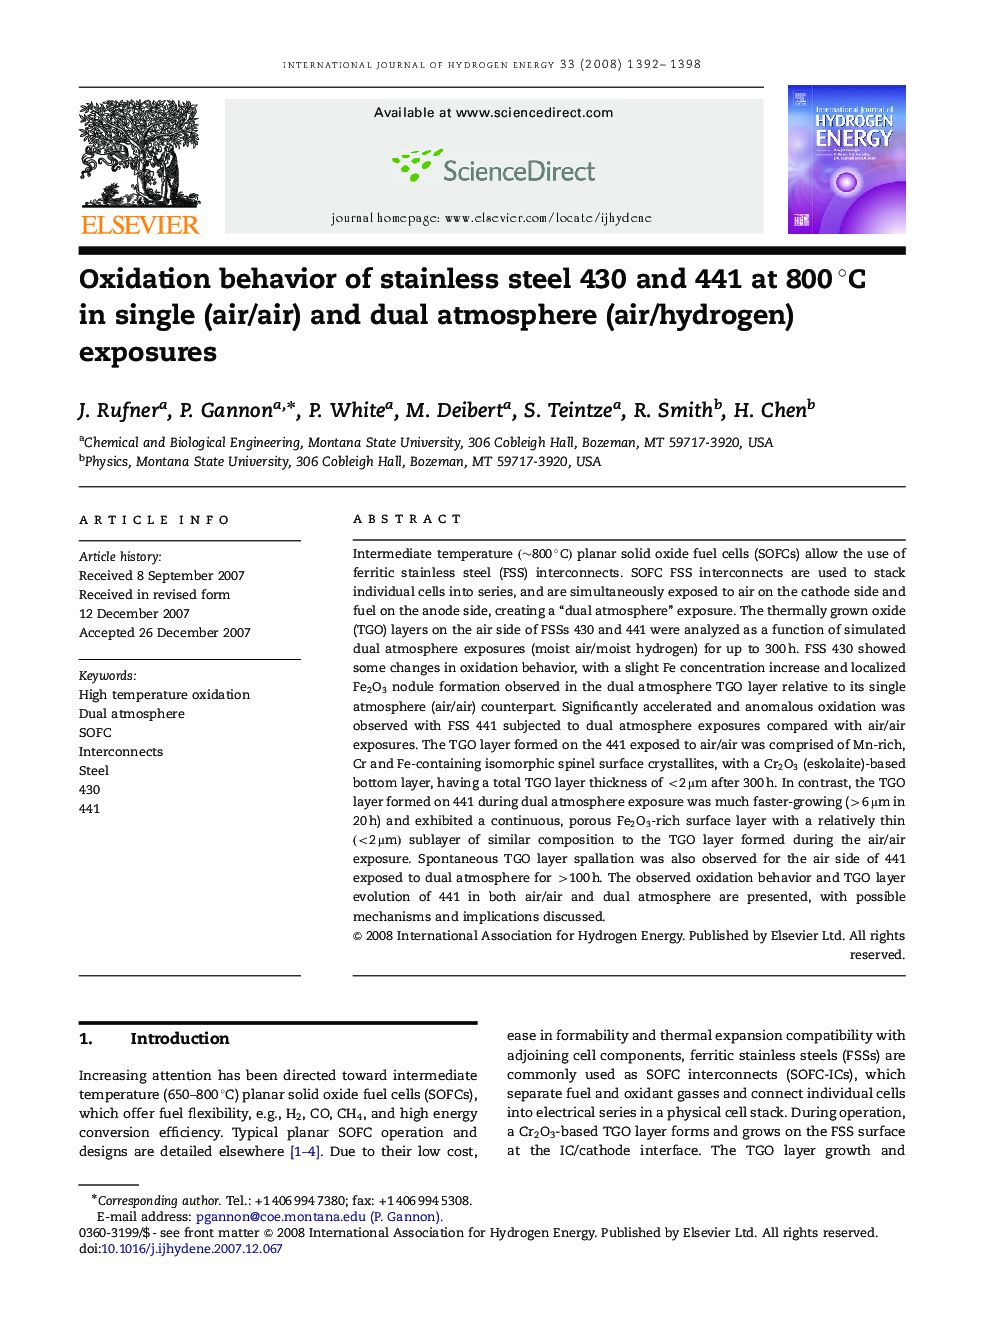 Oxidation behavior of stainless steel 430 and 441 at 800 °C in single (air/air) and dual atmosphere (air/hydrogen) exposures